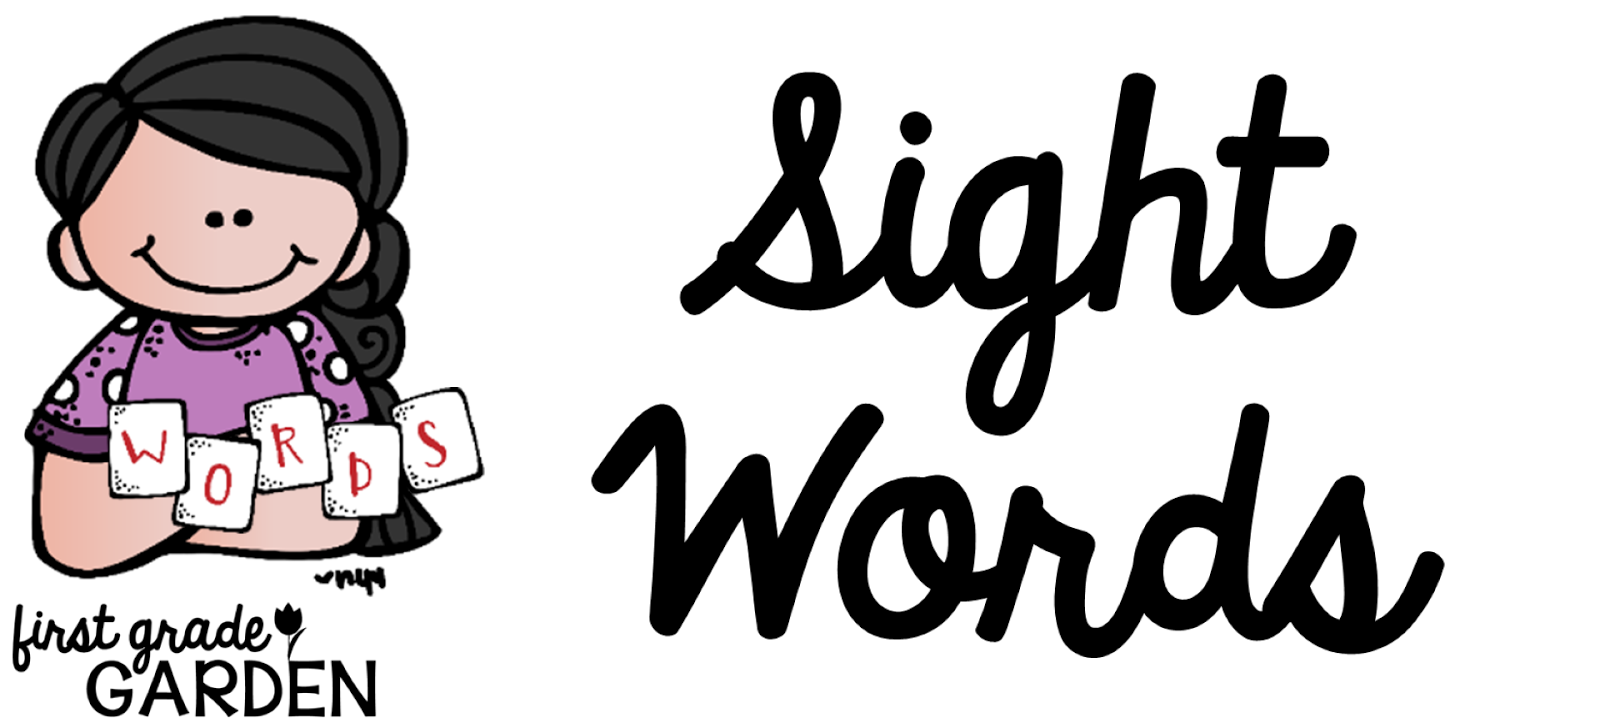 sight words clipart - photo #17